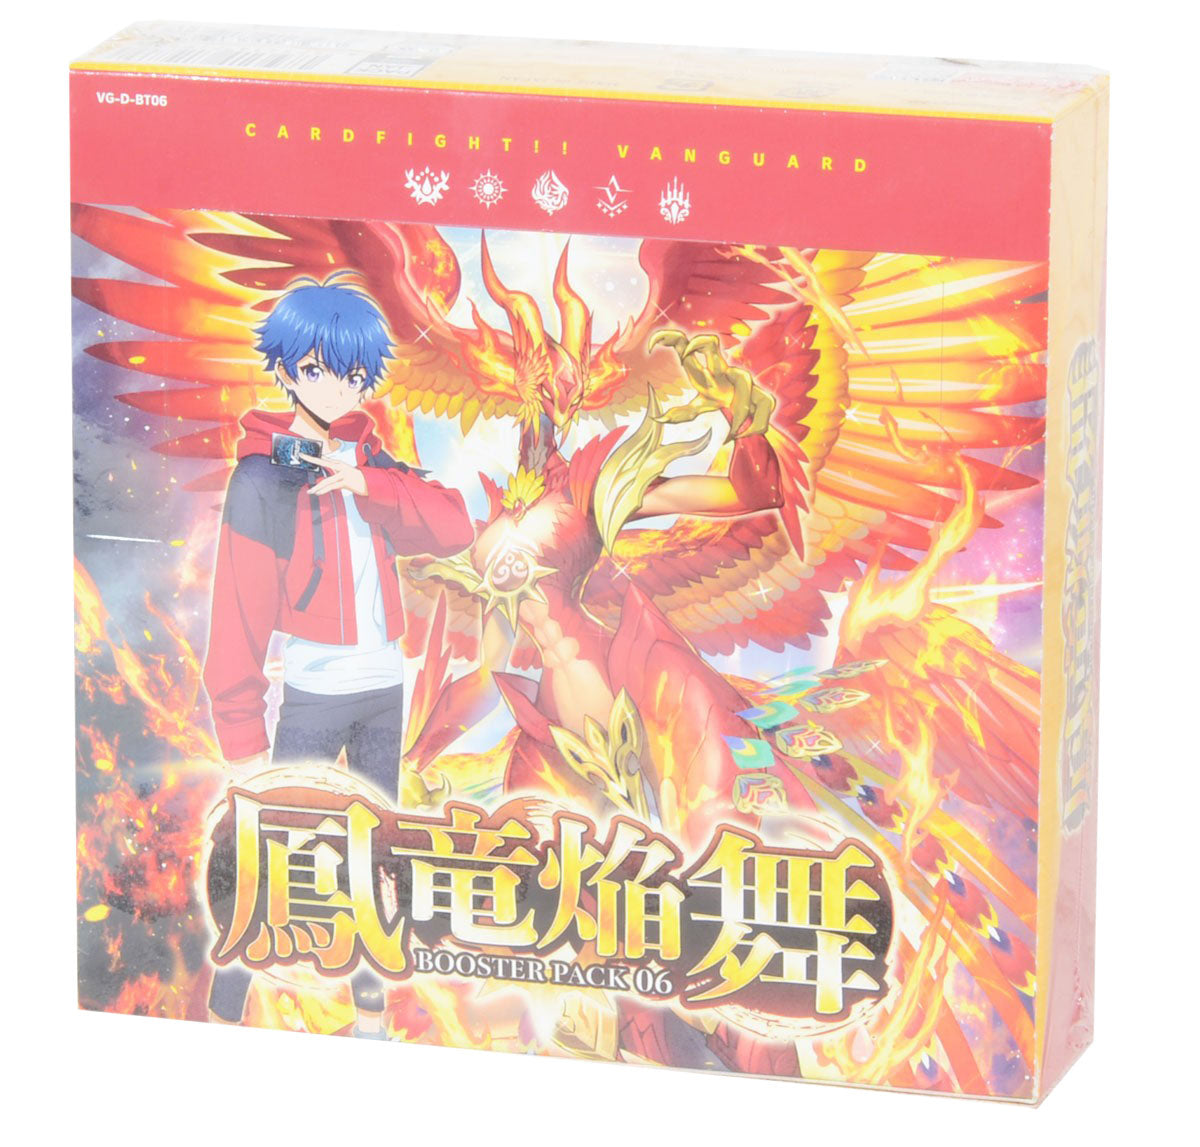 Cardfight!! Vanguard over Dress 6th booster pack "Horyuenbu" [VG-D-BT06] (Japanese)-Booster Pack (Random)-Bushiroad-Ace Cards & Collectibles